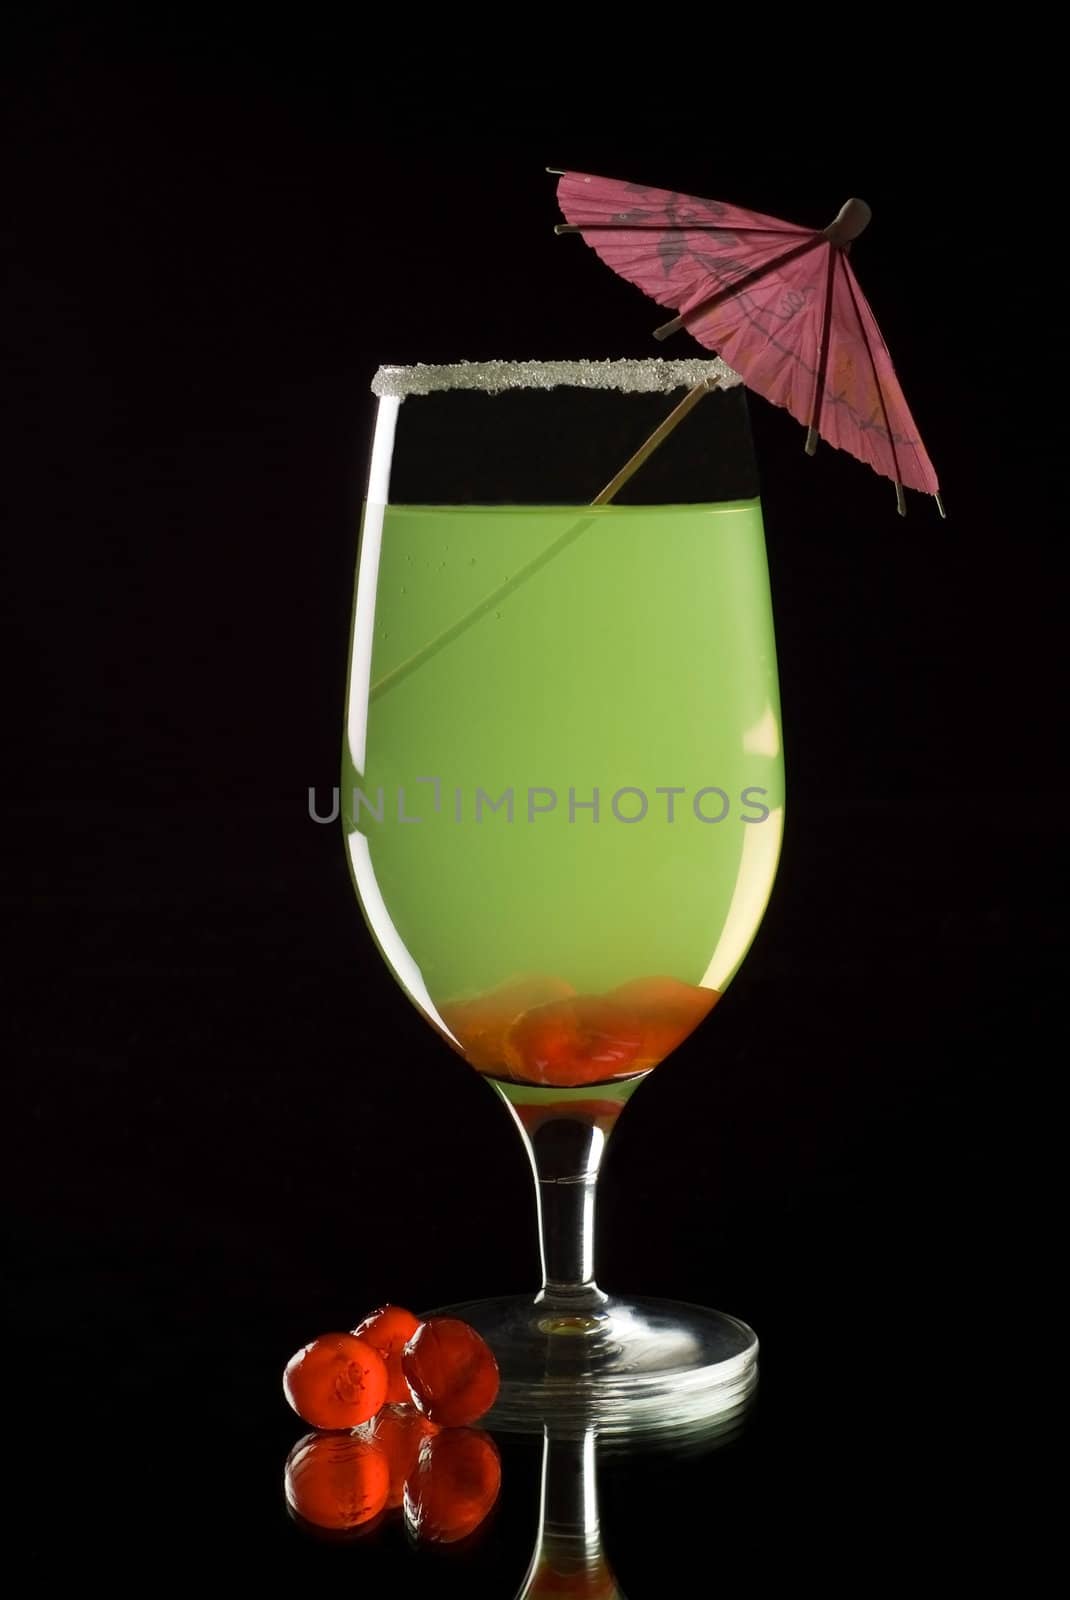 A colourfull cocktail drink by alistaircotton